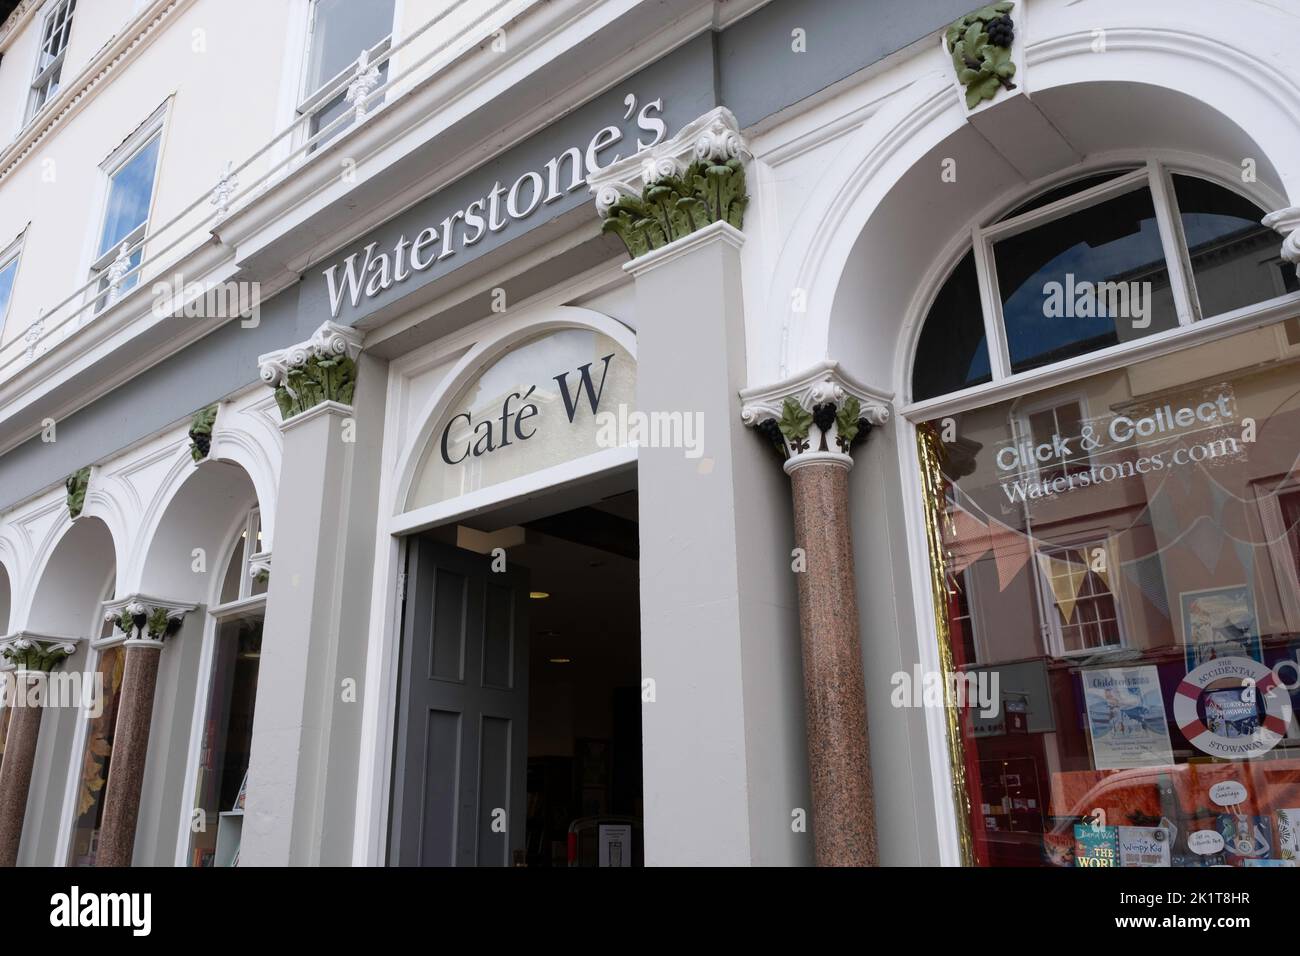 Entrance and frontage to Waterstone's bookshop and cafe which is located in the Butter Market in Bury Sint Edmunds, England Stock Photo